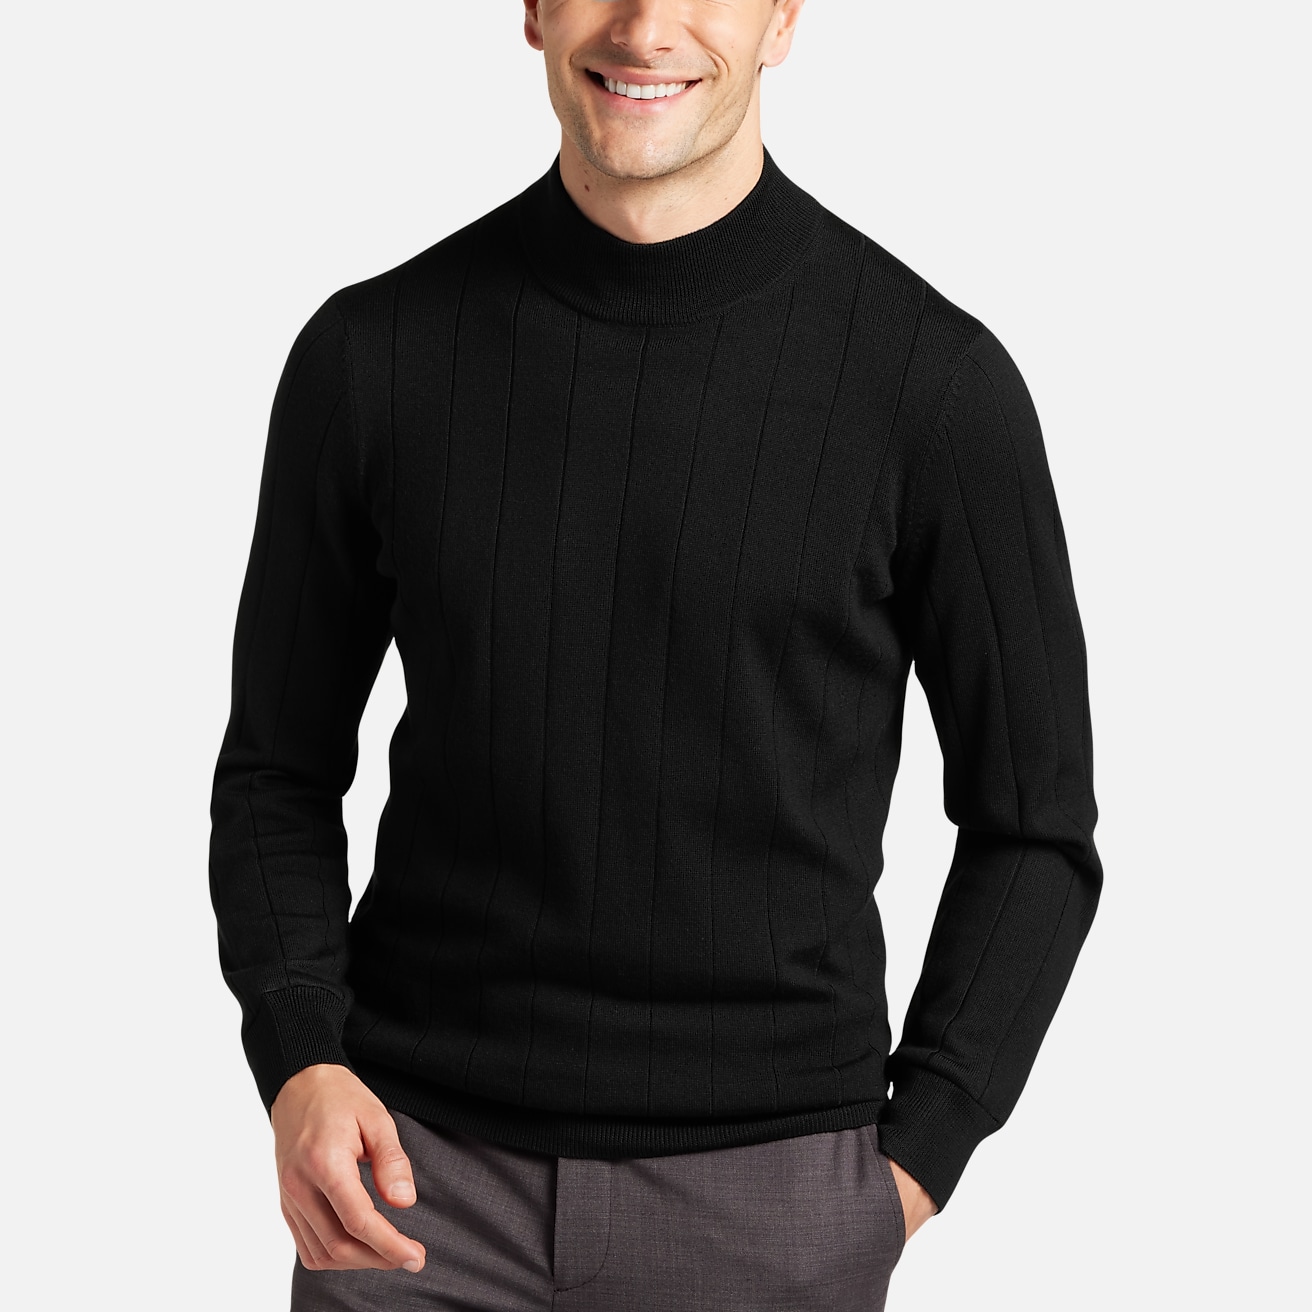 https://image.menswearhouse.com/is/image/TMW/TMW_6NWY_02_JOSEPH_ABBOUD_SWEATERS_BLACK_MAIN?imPolicy=pdp-mob-2x